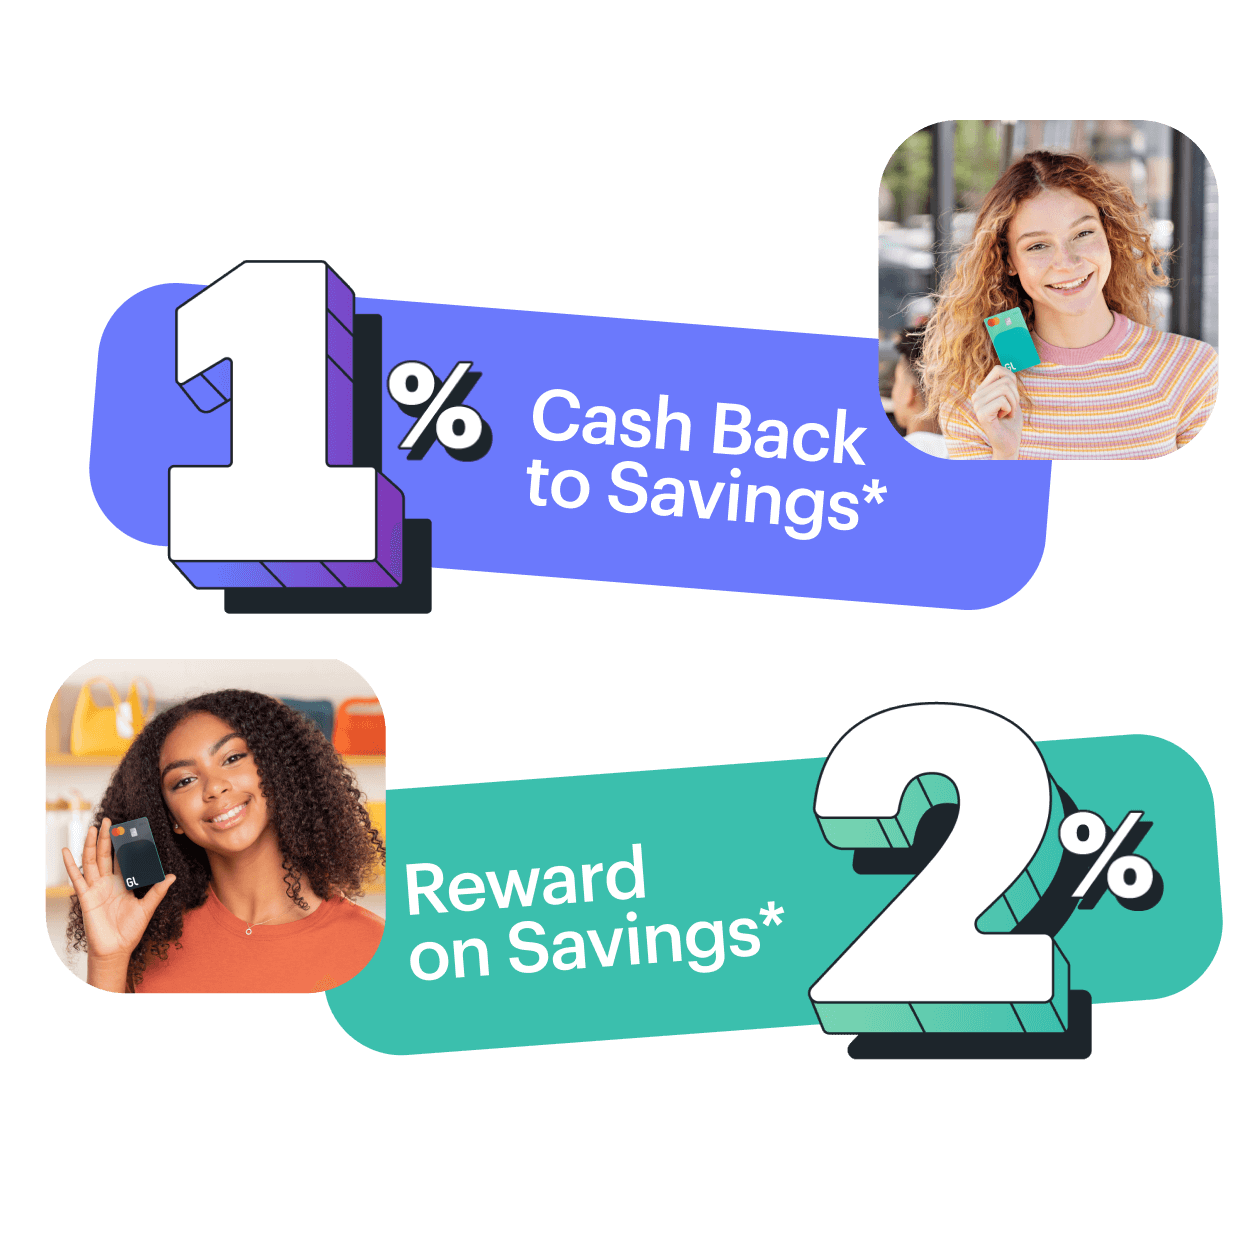 cash back and savings percentages for Greenlight kids, with two girls holding their Greenlight kids debit card
